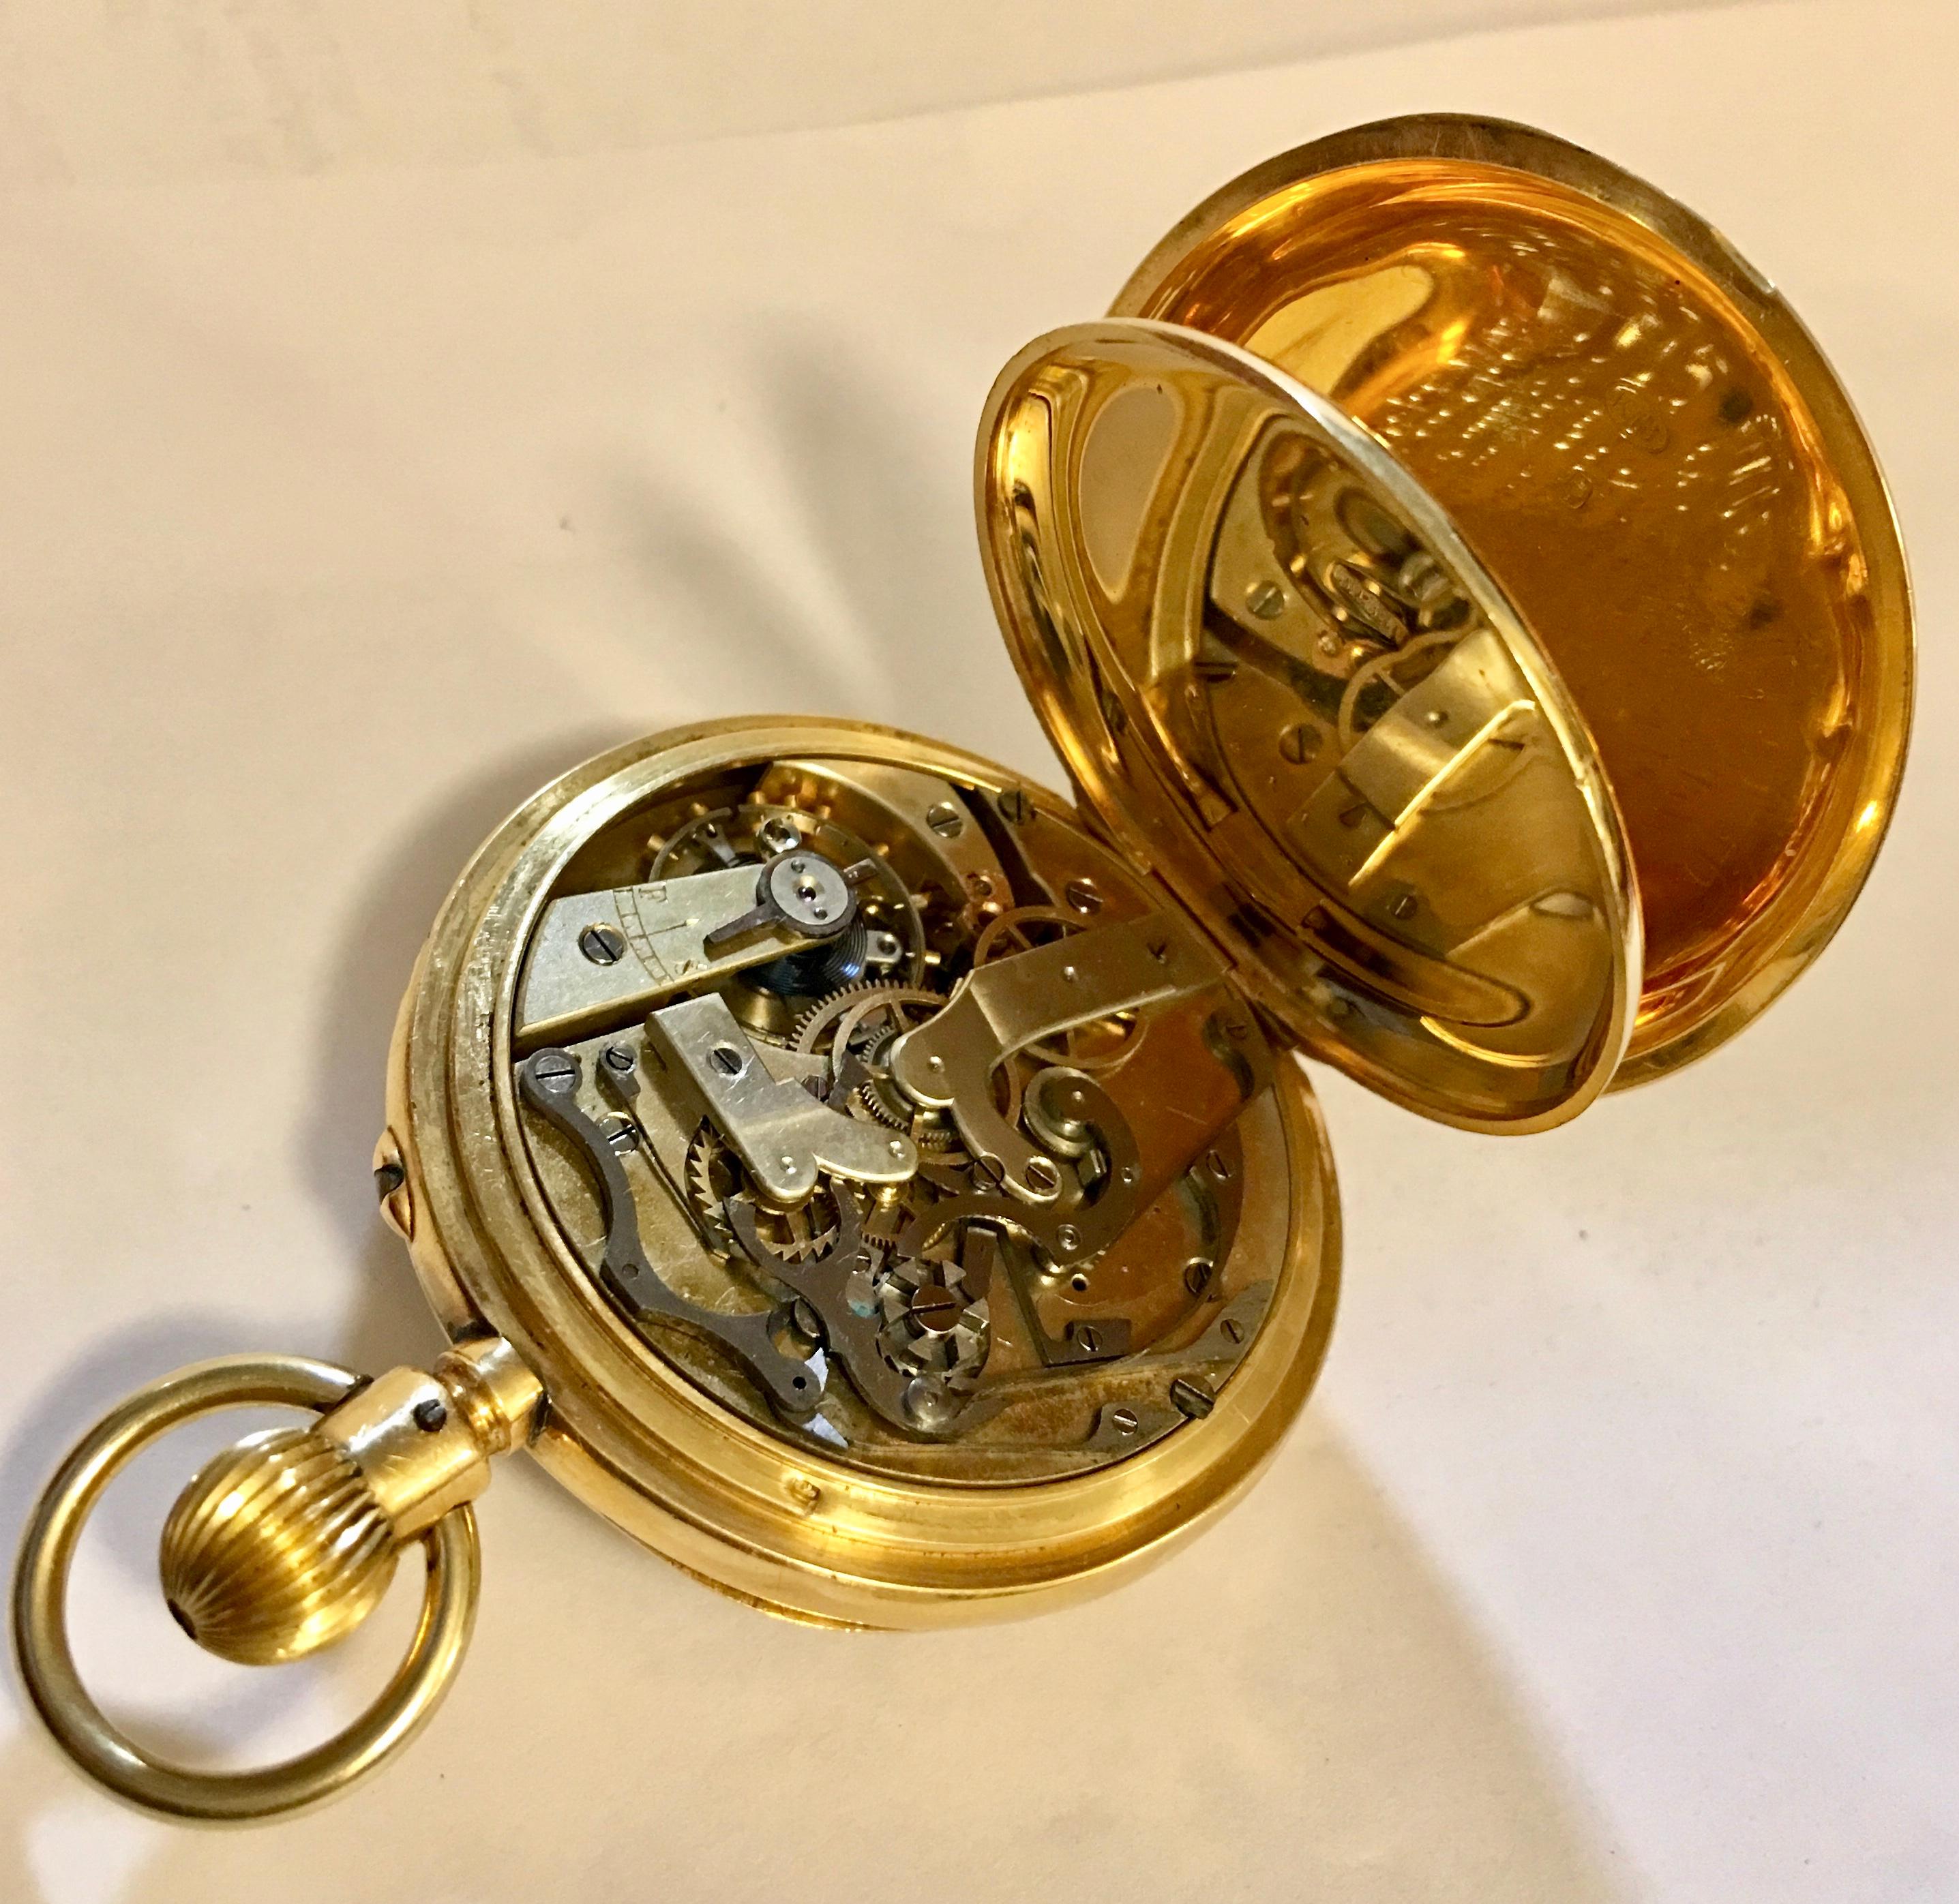 how to clean a pocket watch